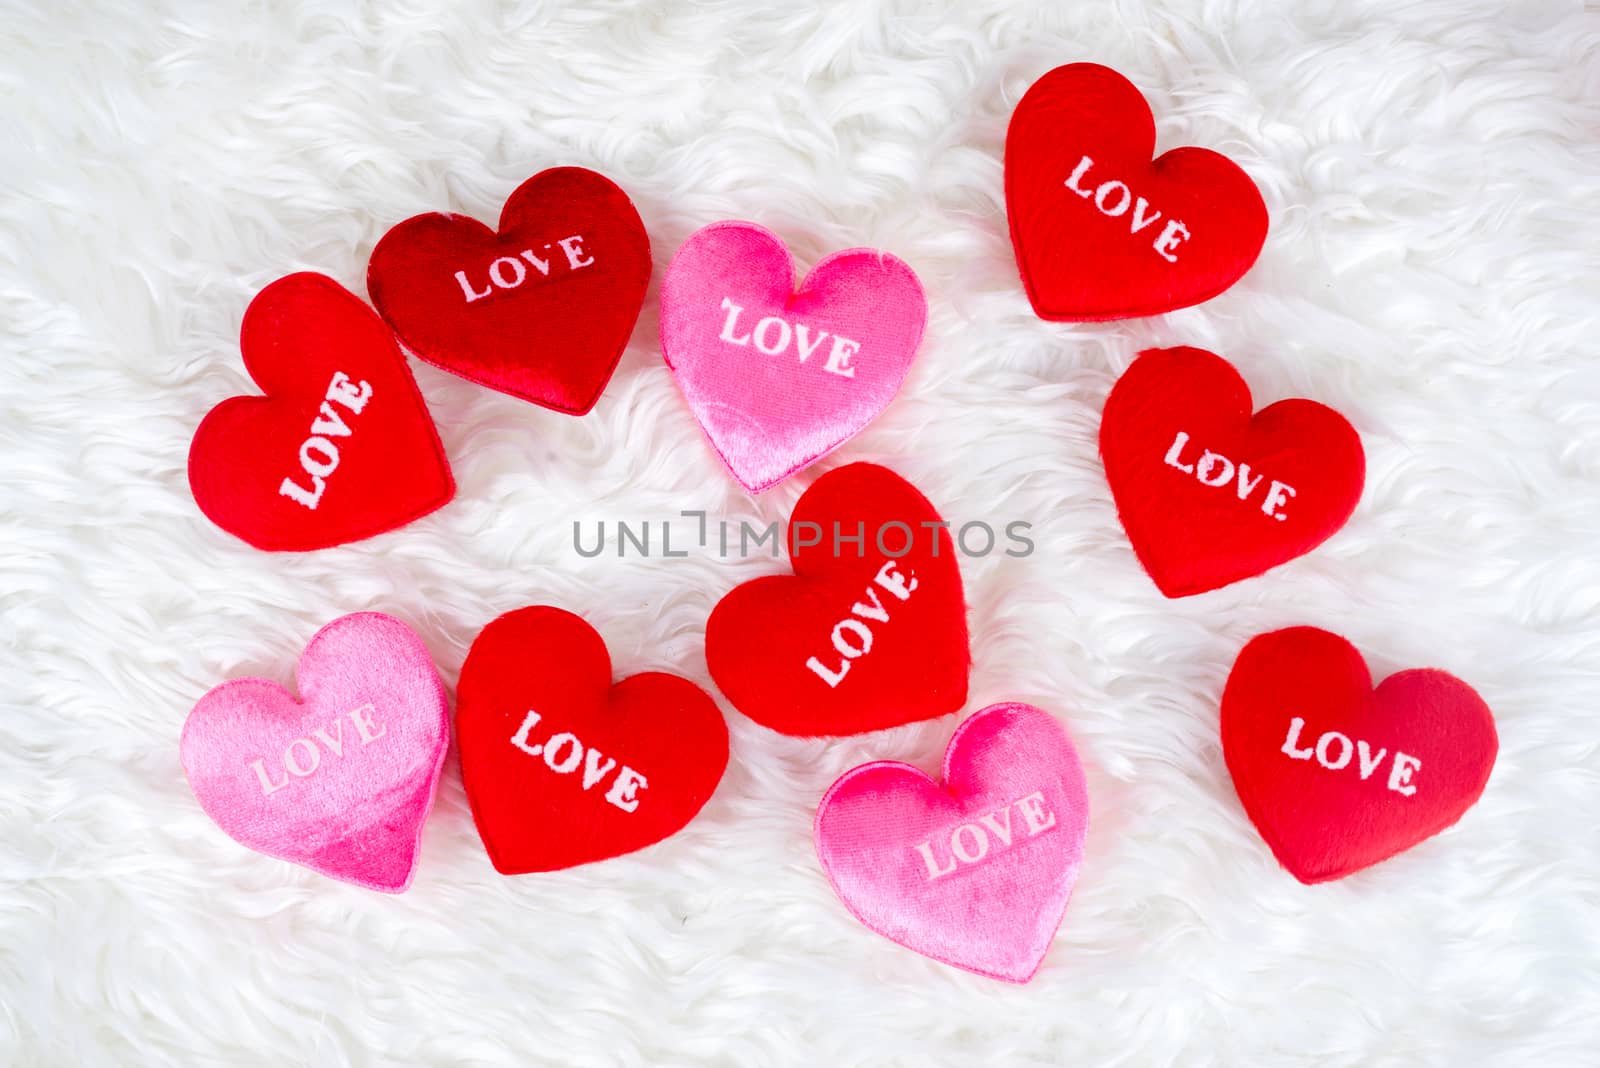 Decorated gifts with a heart shapes and text "love" embeded on, placed on feather background